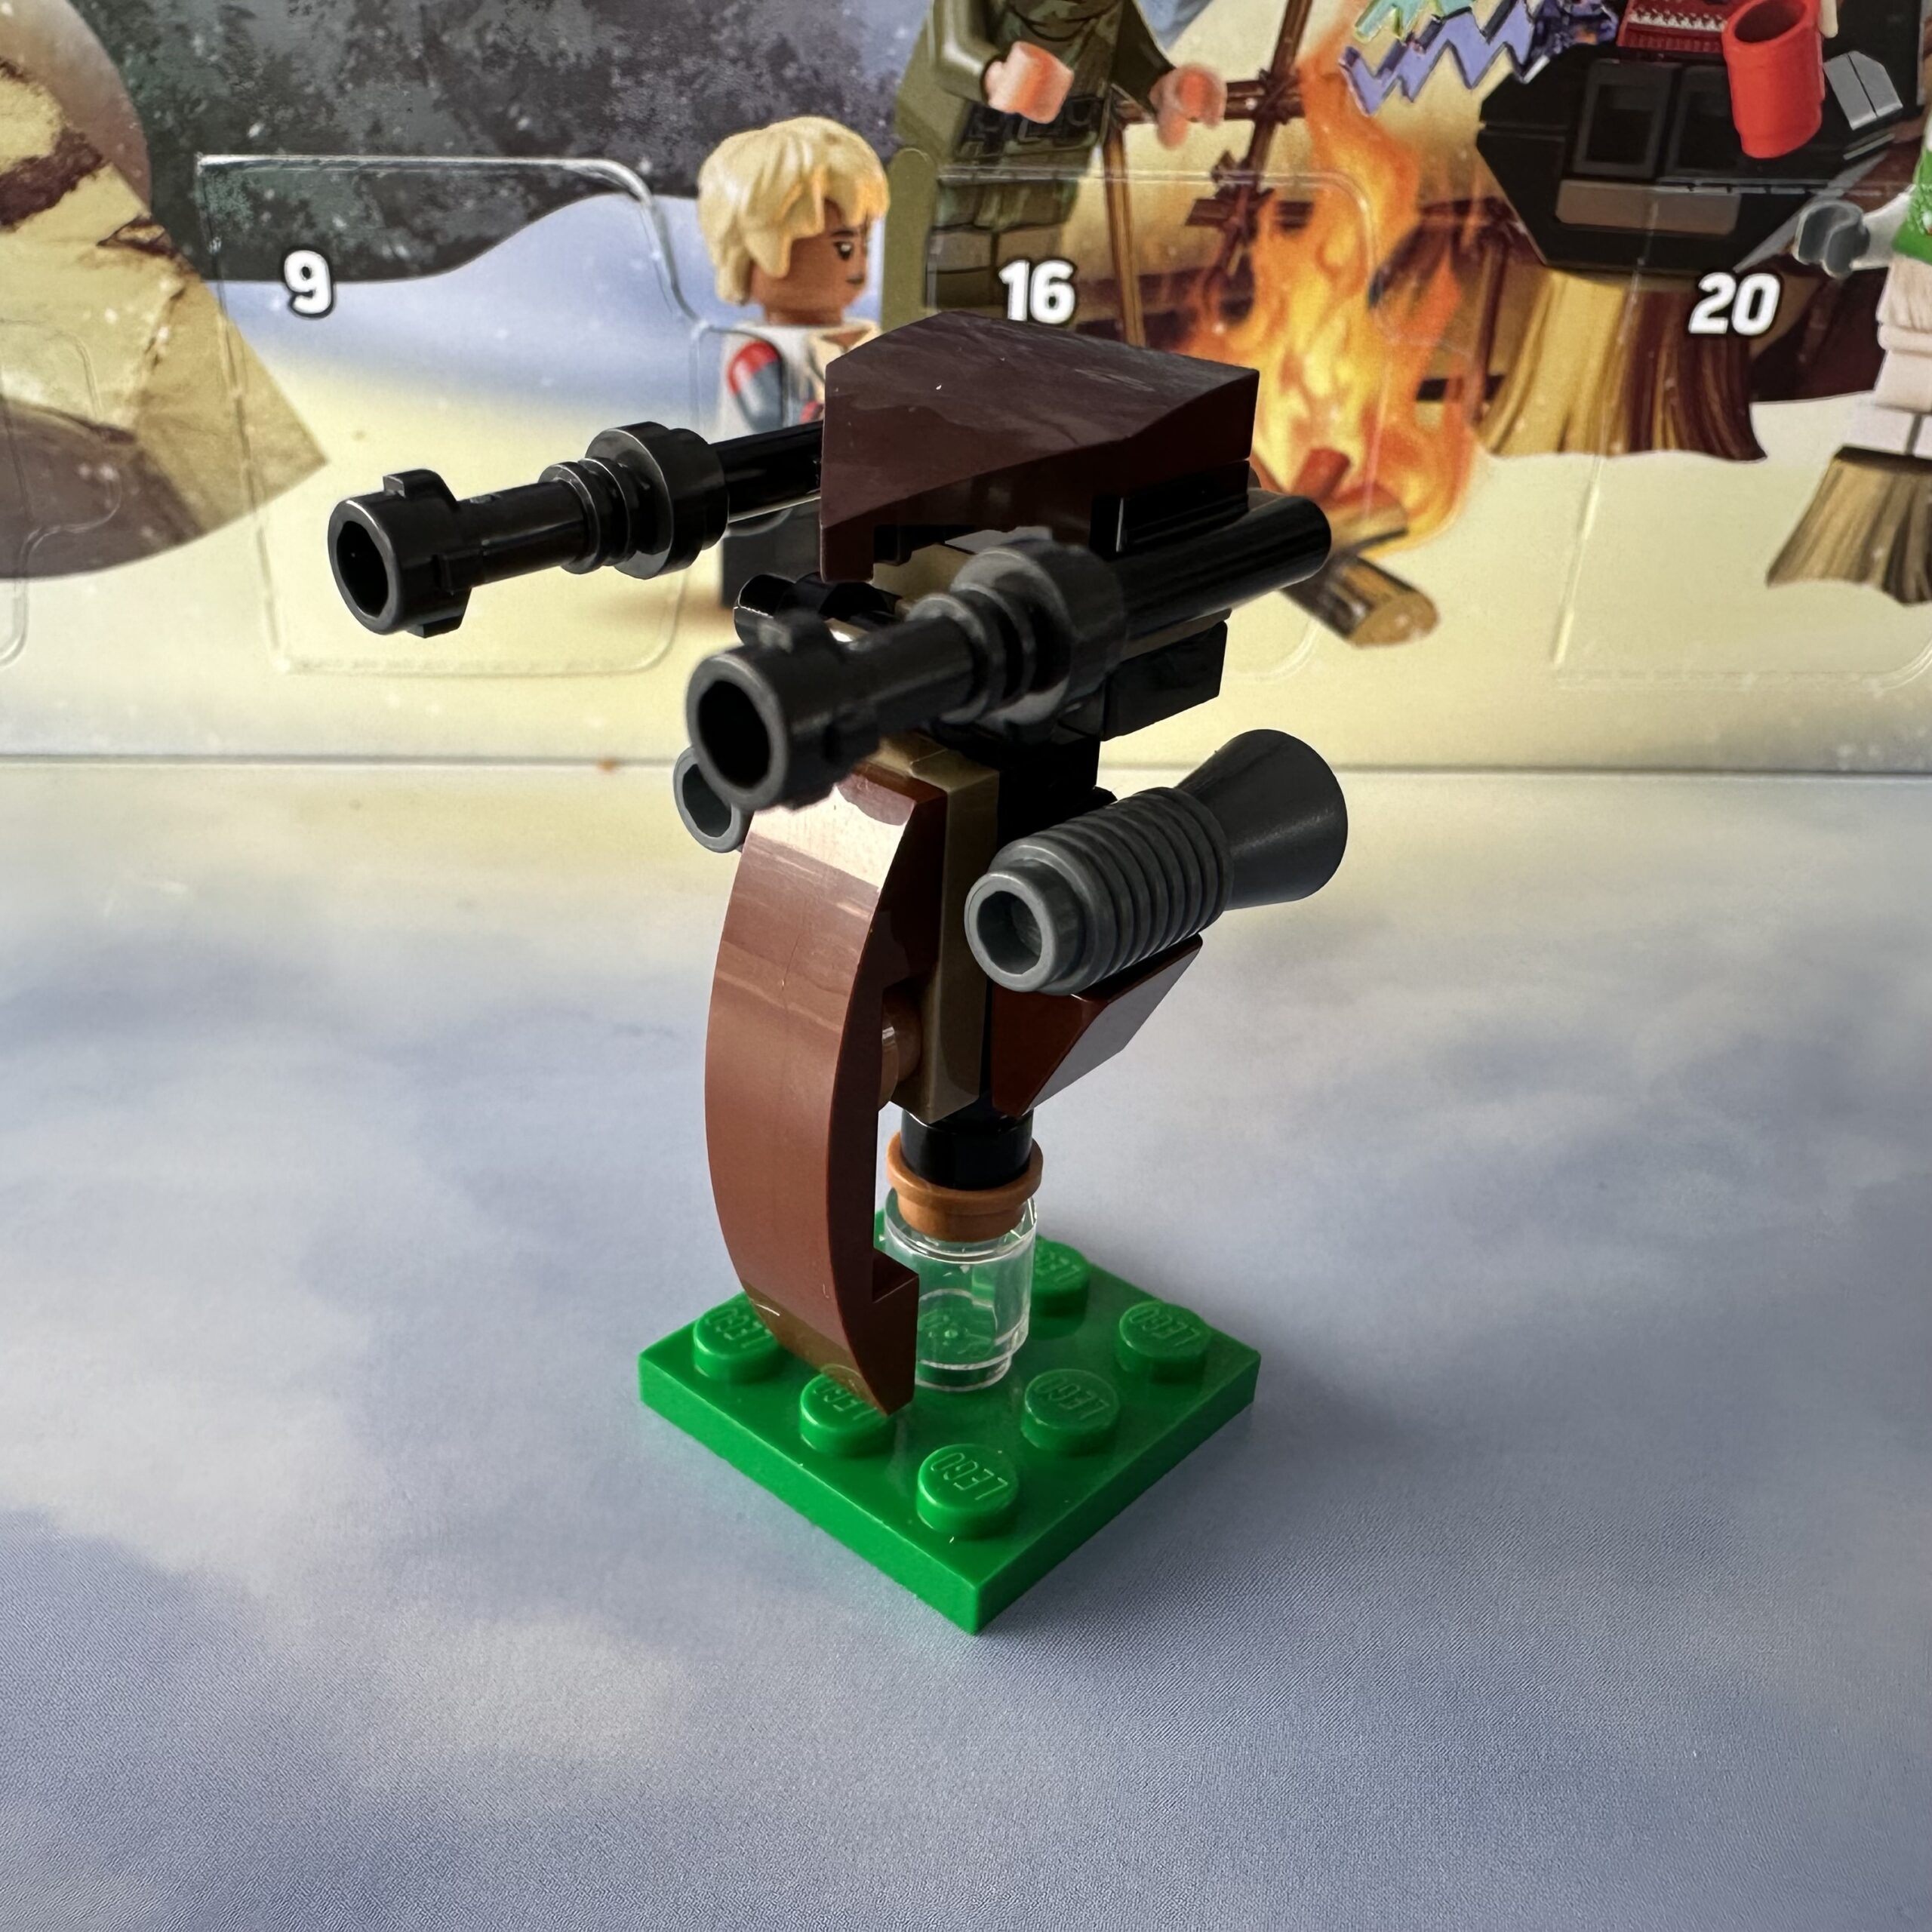 LEGO micro-build of a Star Wars Clone Wars era battle droid speeder. It's mostly brown and black and hovers above a small square of grass.